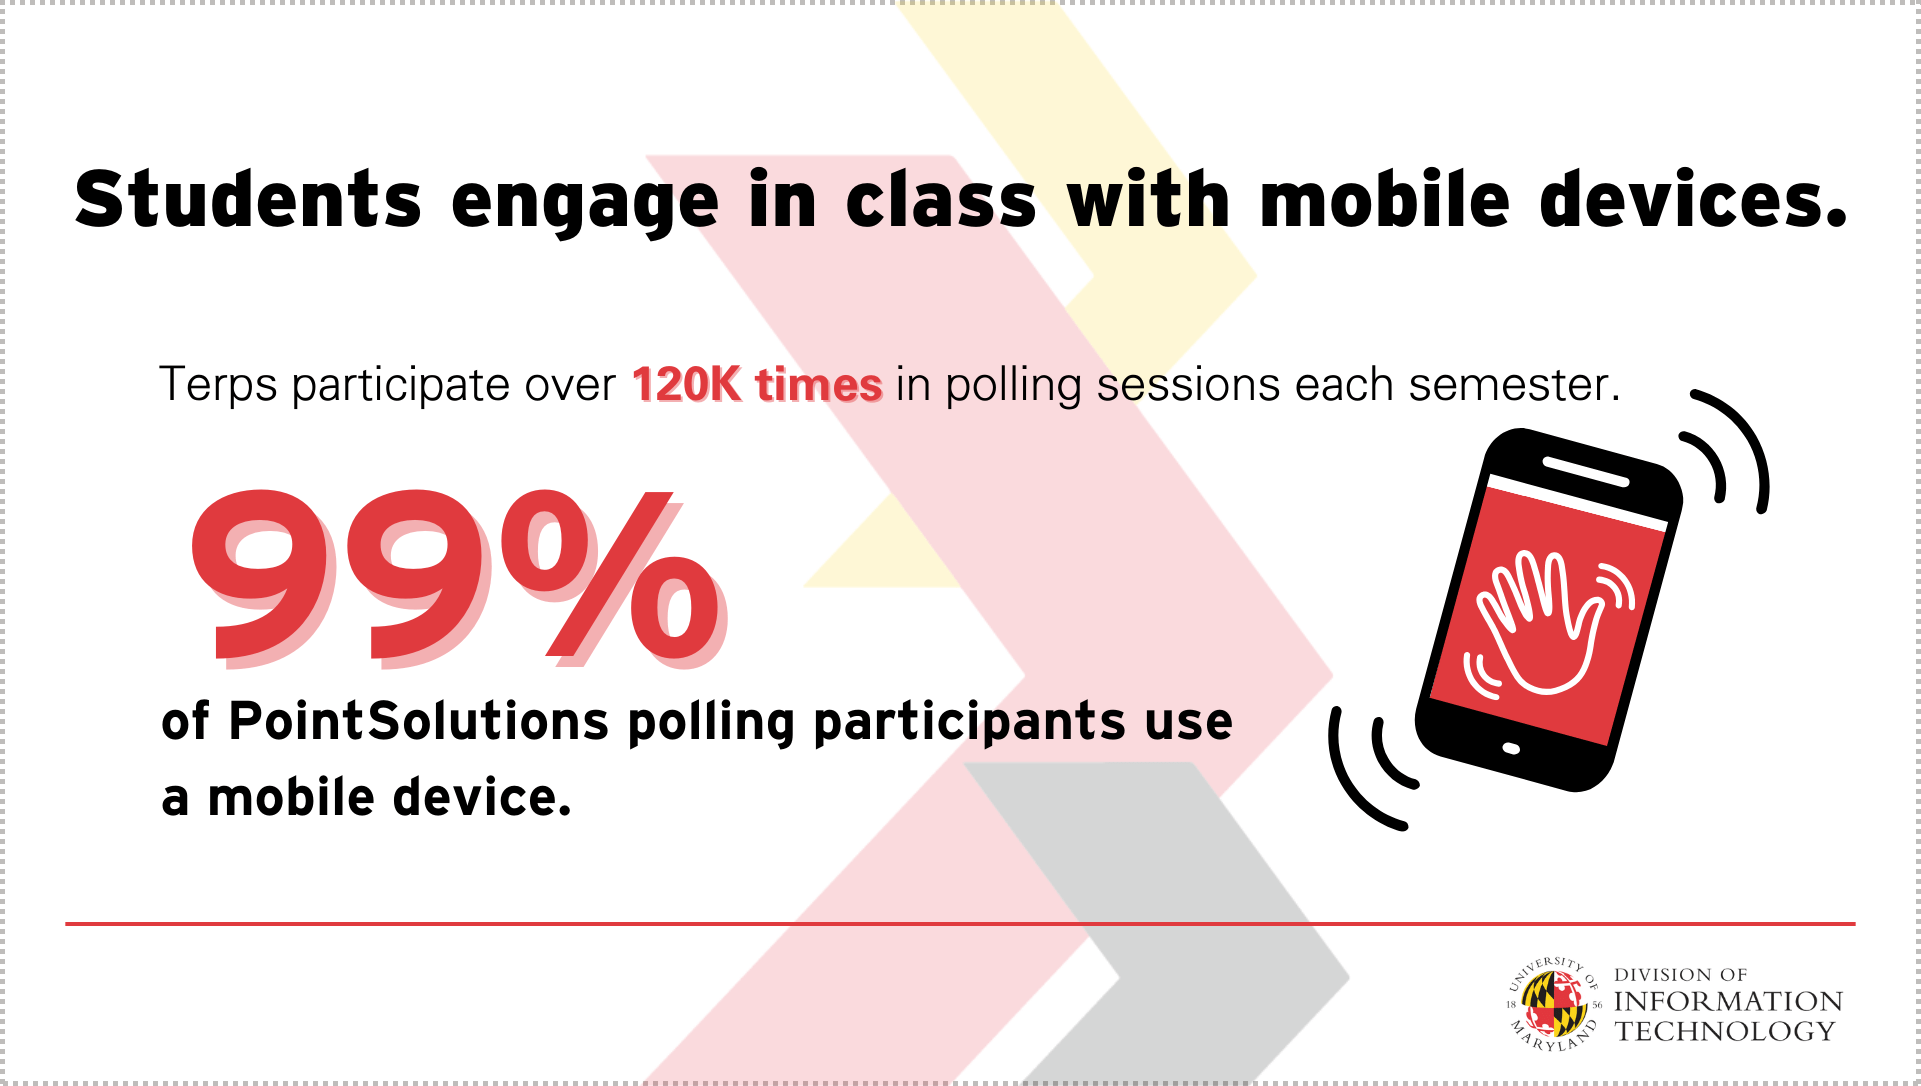 99% of pointsolutions polling participants use a mobile device